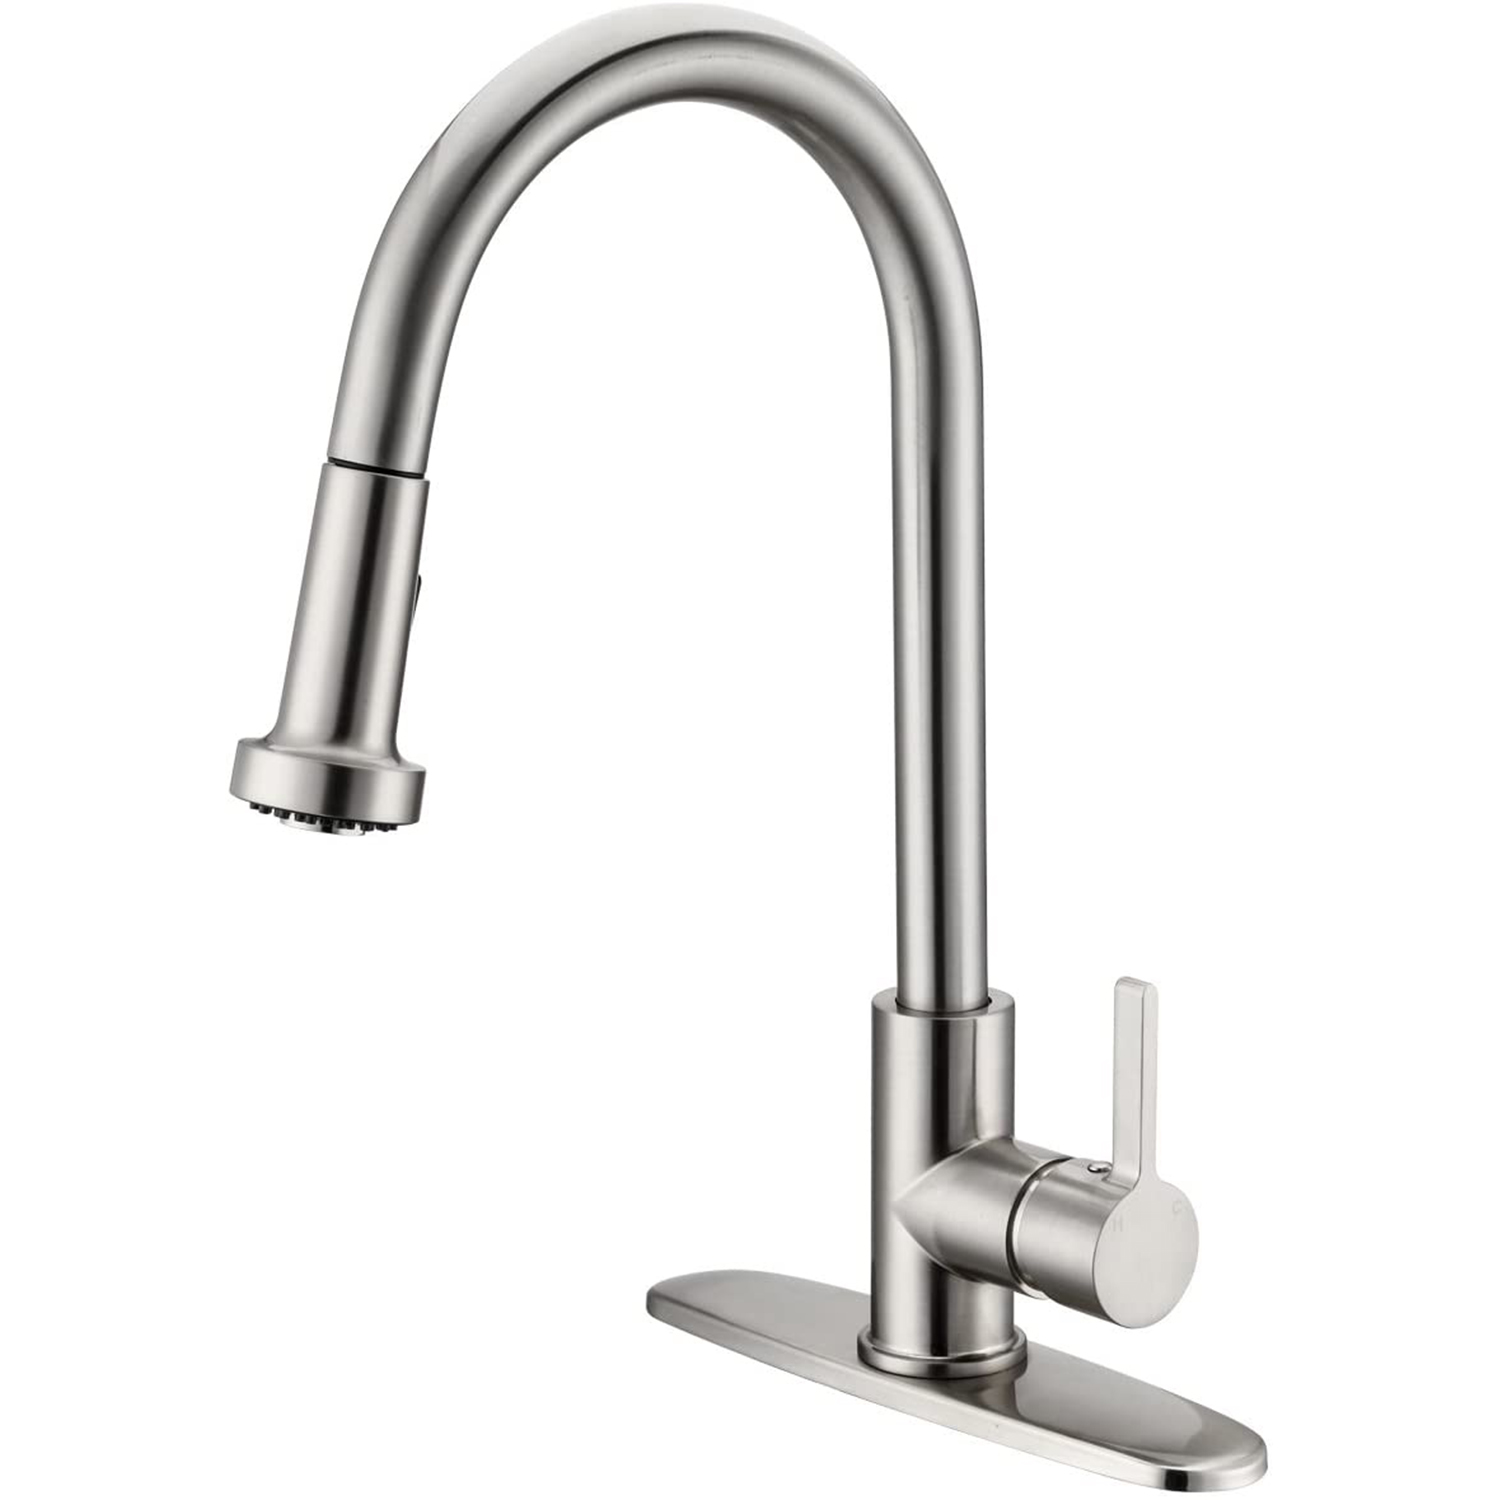 Kodaen FZ23131BN Brushed Nickel Pull-Down Kitchen Faucet + Cover Plate